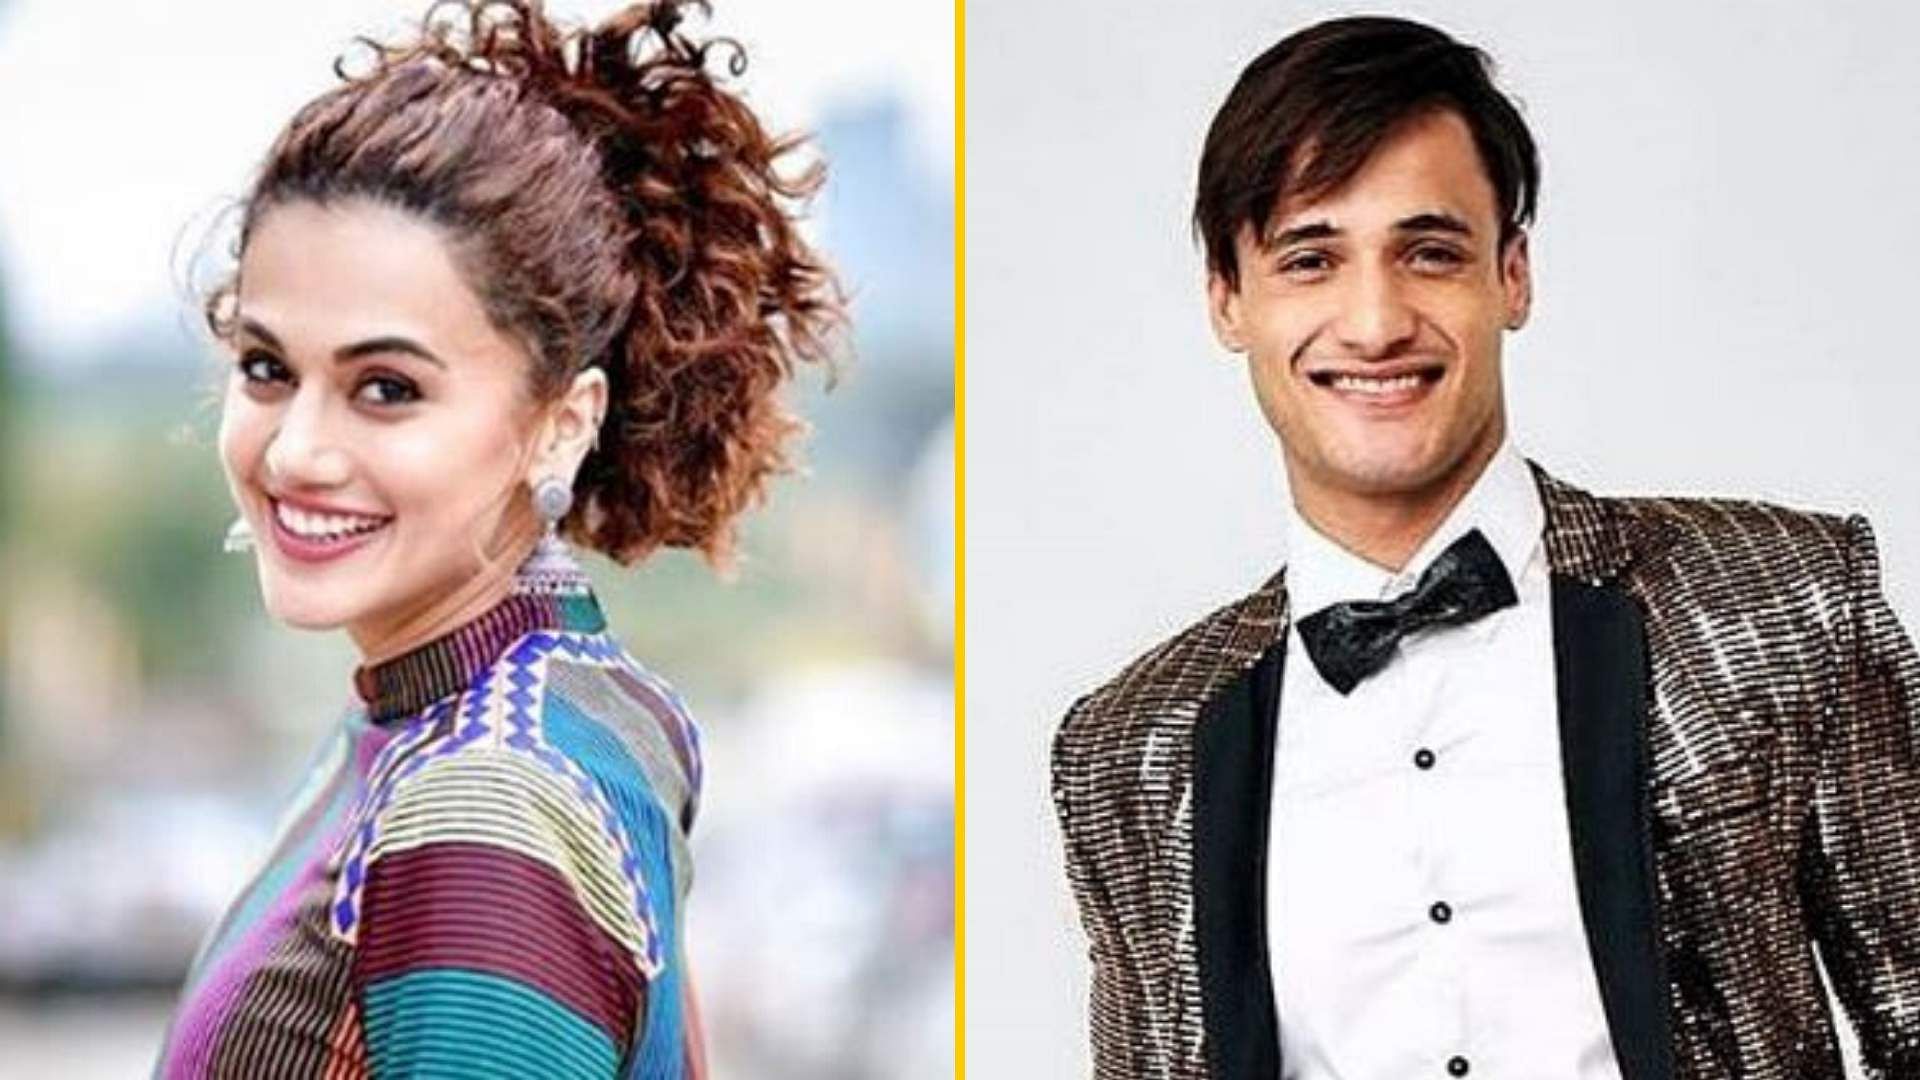 Taapsee Pannu will star in a remake of <i>Run Lola Run; </i>KJo has dismissed rumours of Asim Riaz being cast in <i>Student of the Year 3.</i>